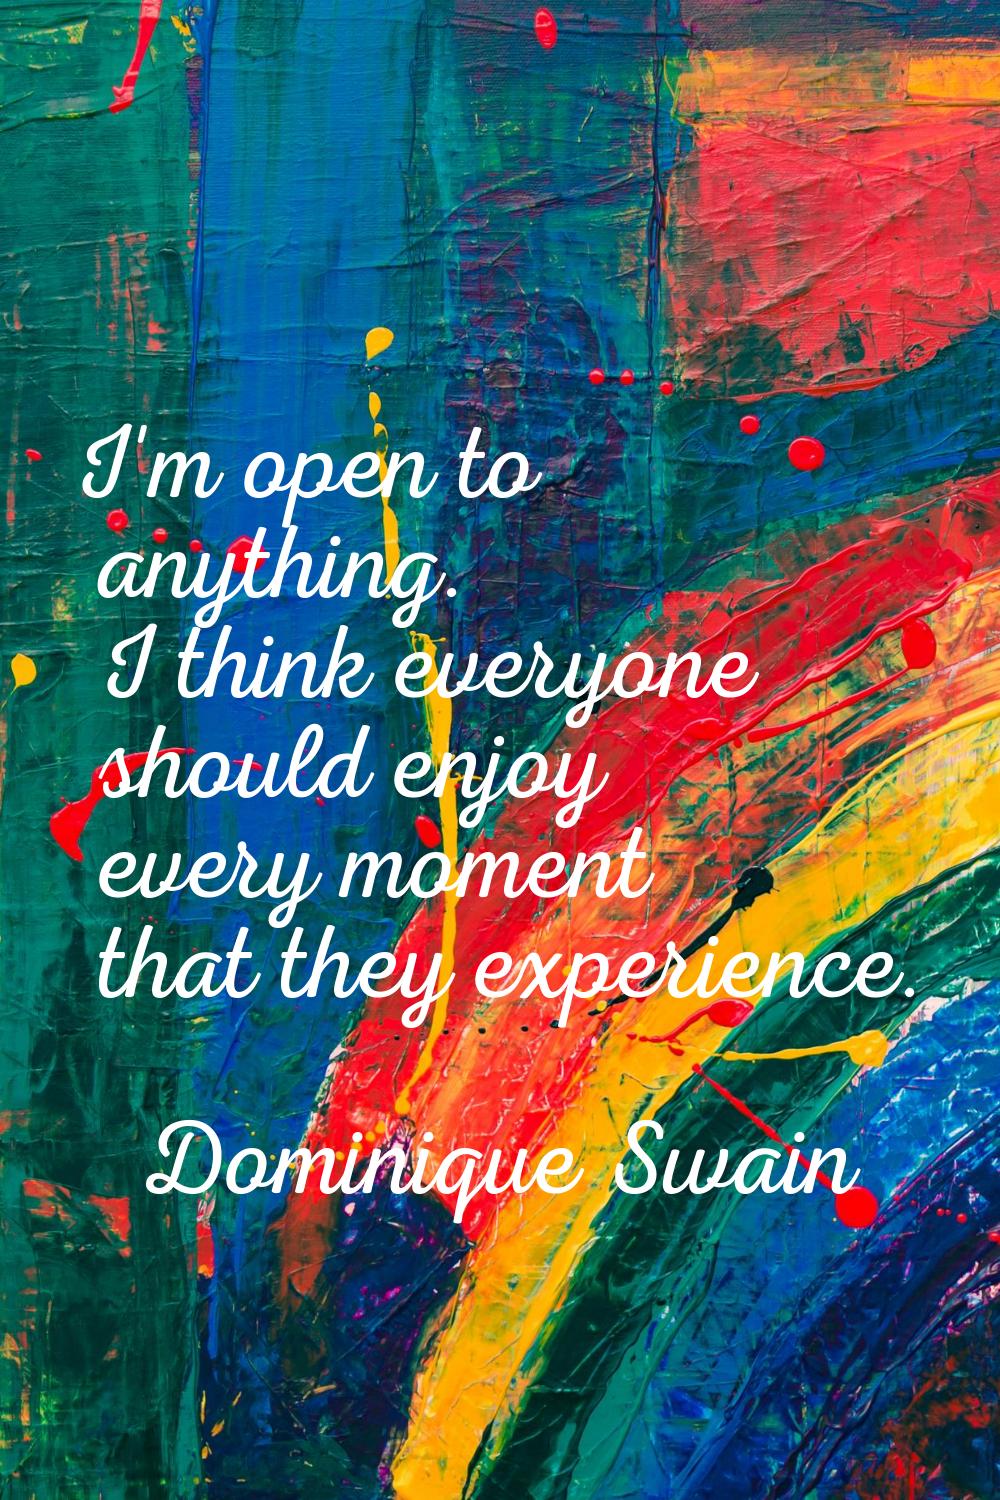 I'm open to anything. I think everyone should enjoy every moment that they experience.